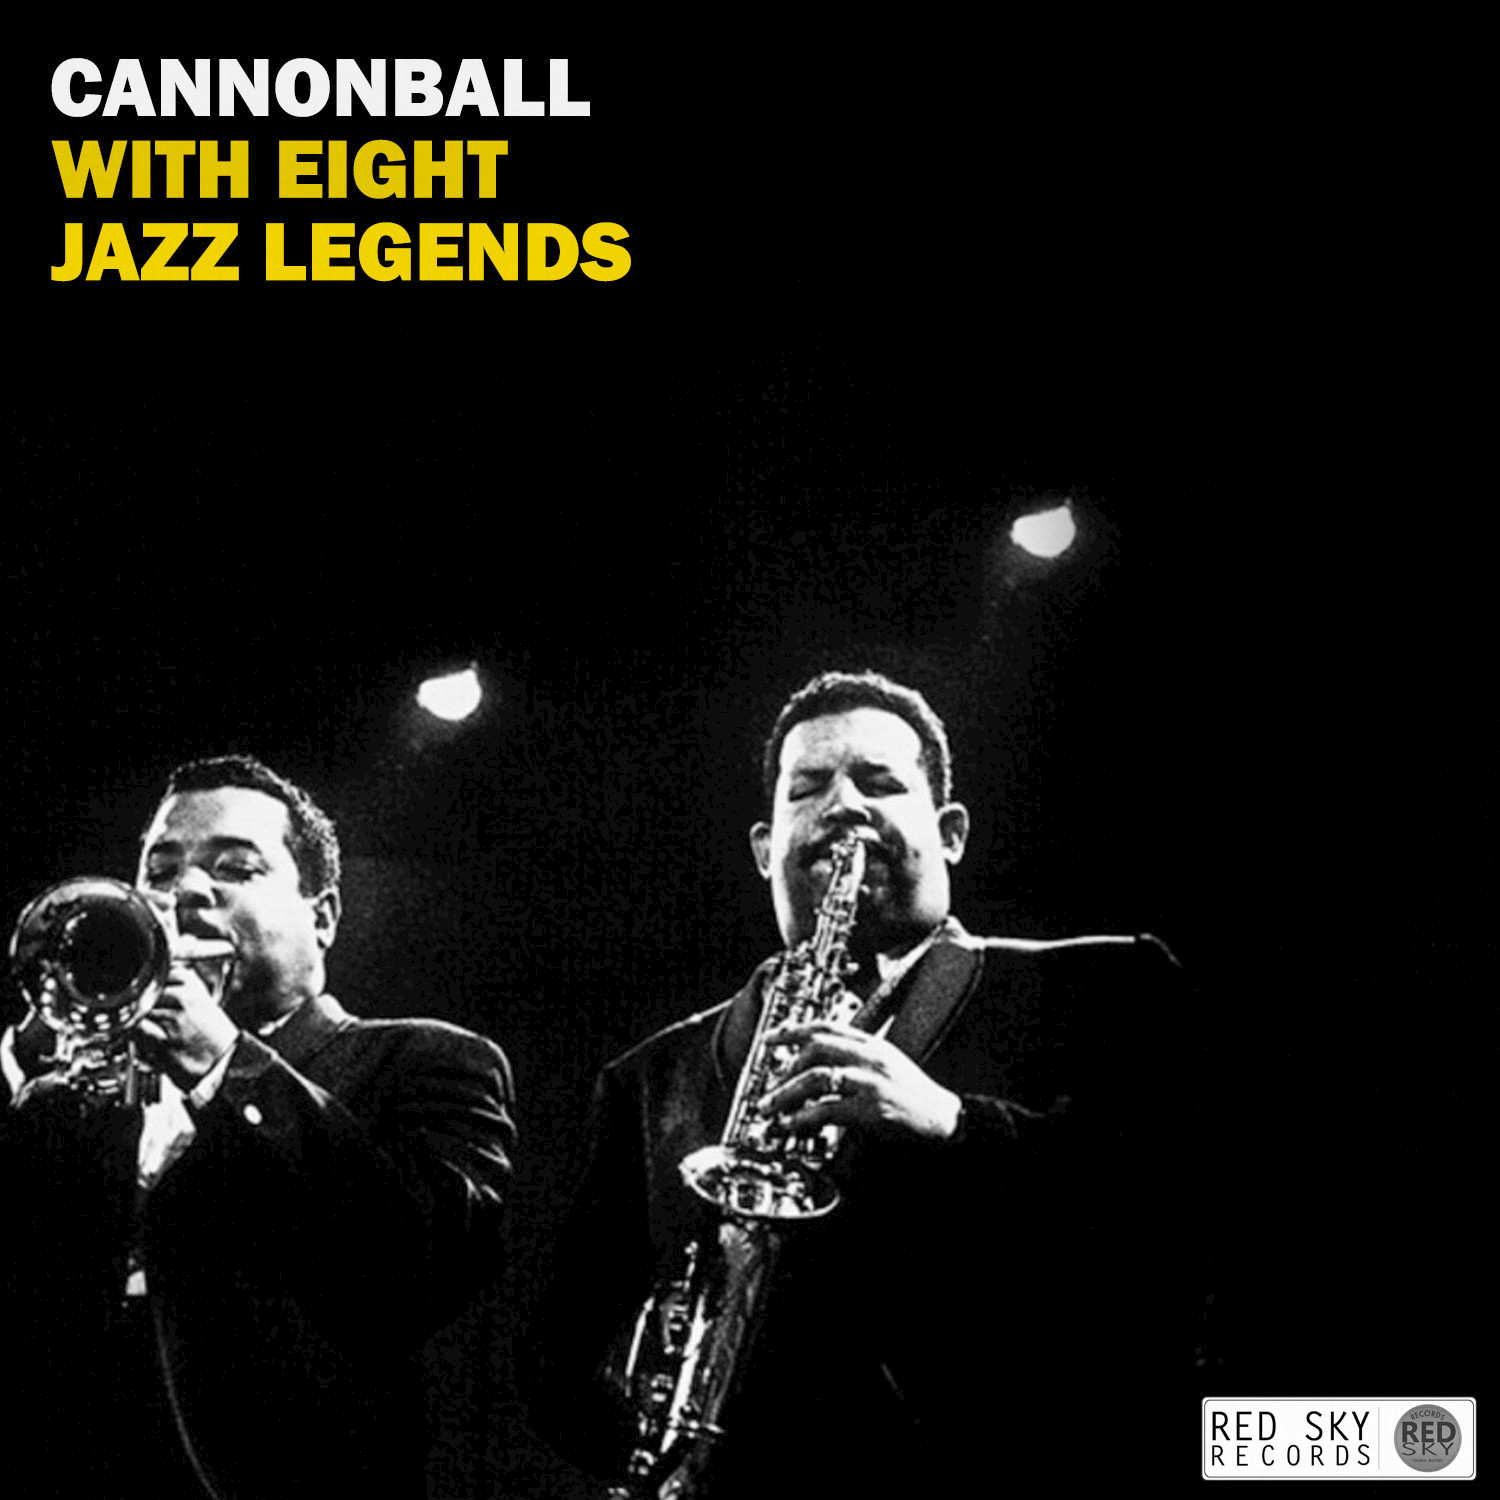 Cannonball with Eight Jazz Legends